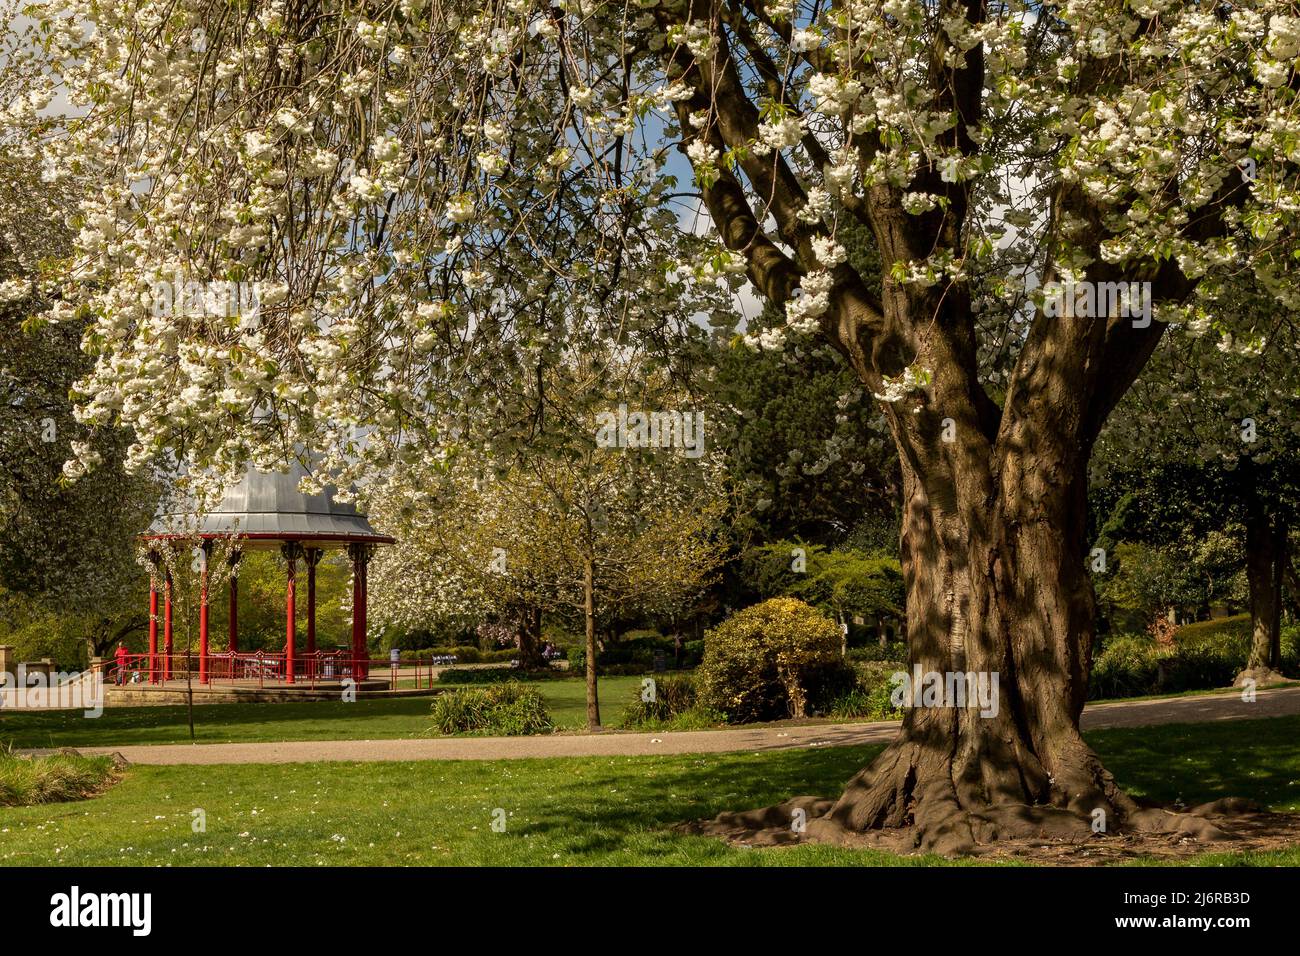 Spring blossom in Roberts Park, Baildon, Yorkshire, England. The park is a Grade ll listed park on the English Heritage Register of Parks and Gardens. Stock Photo